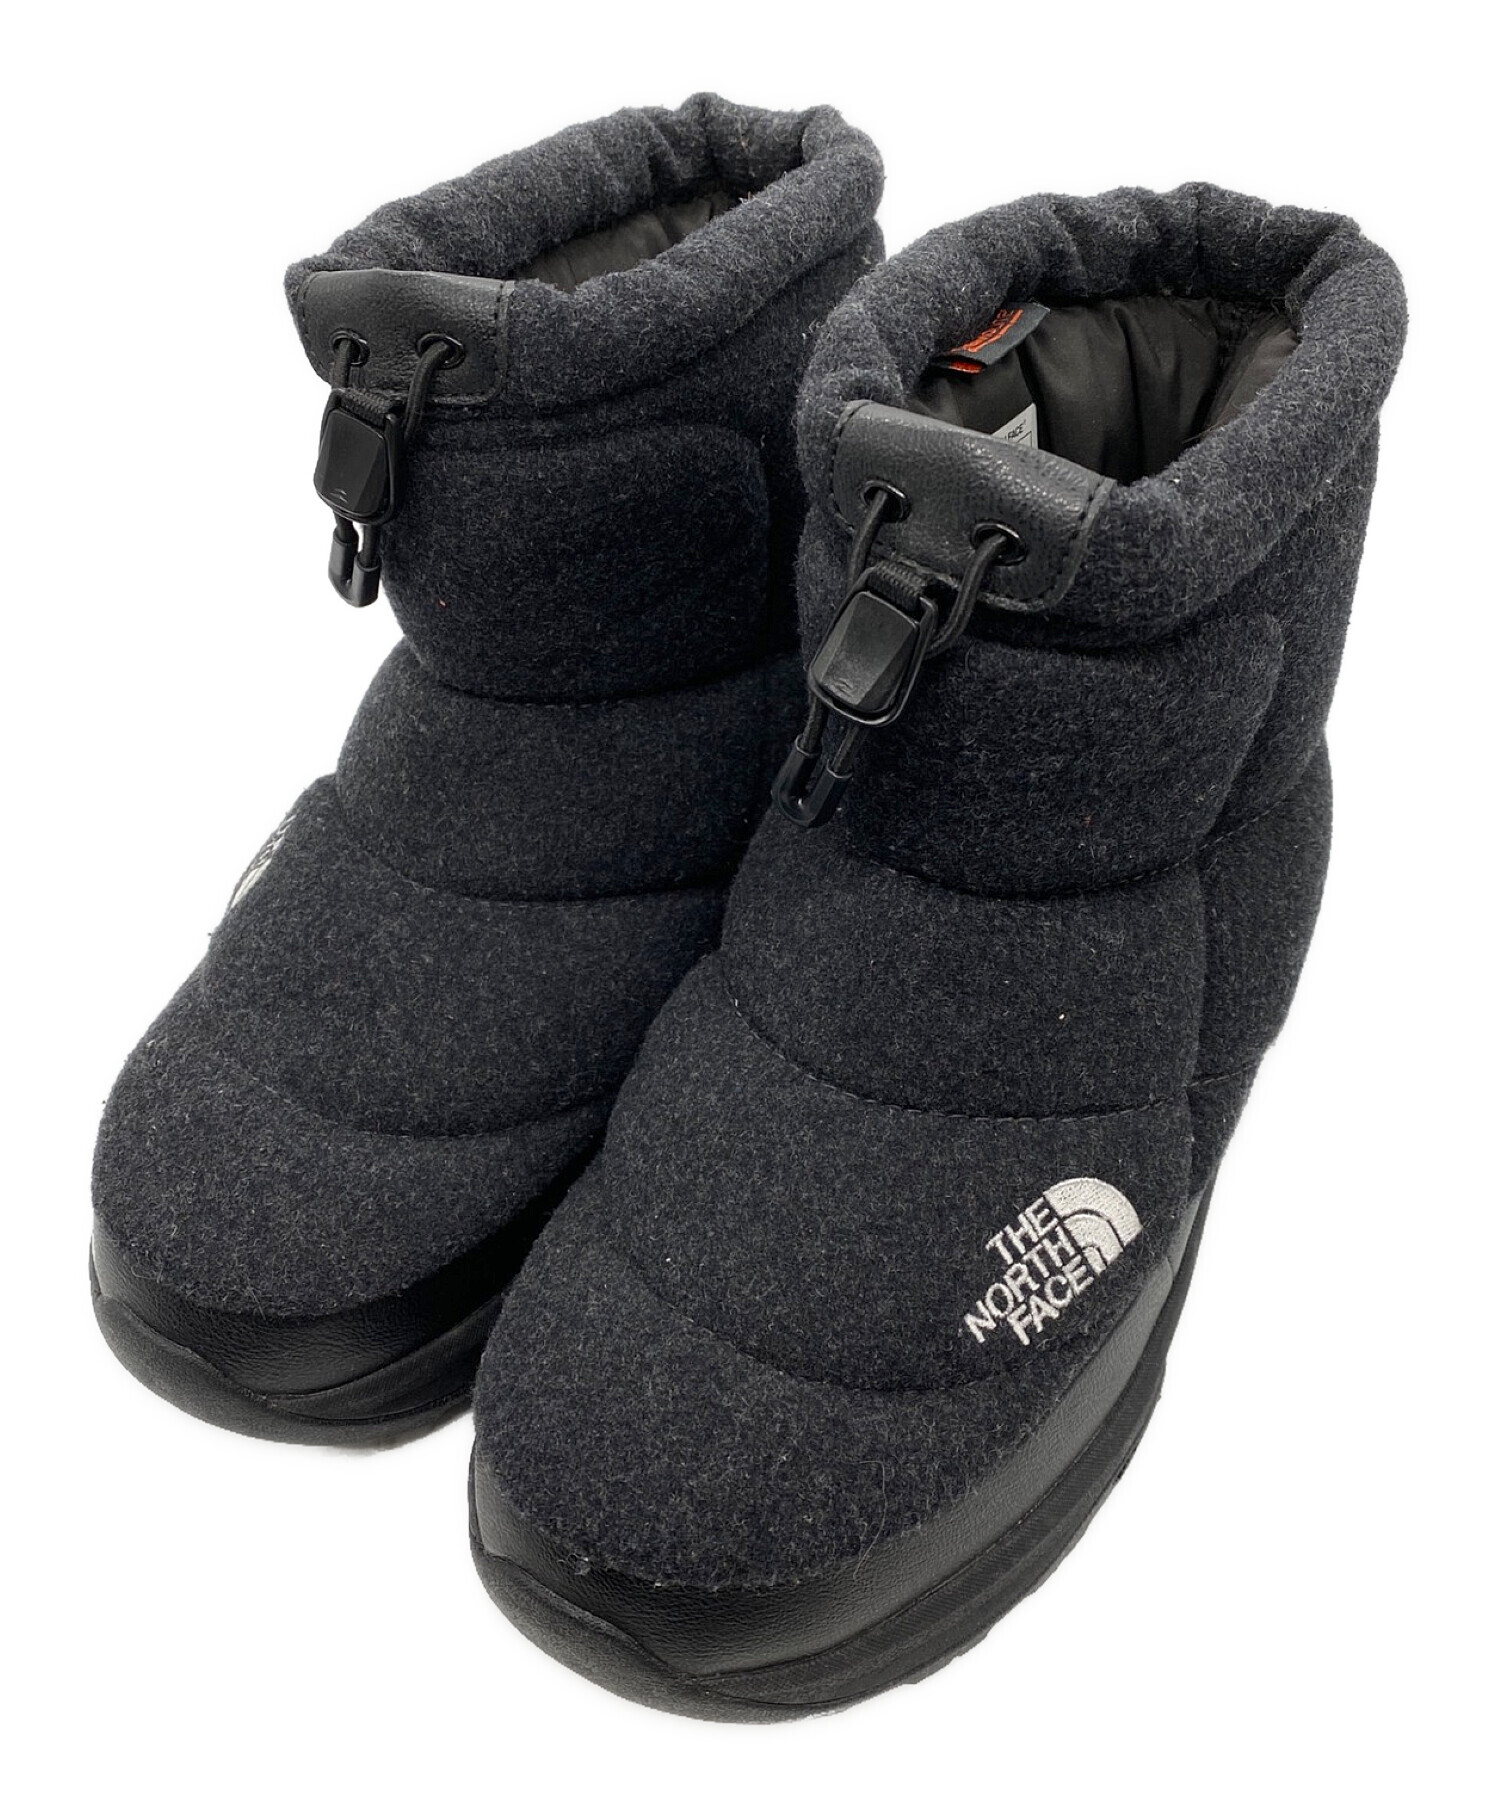 THE NORTH FACE Nuptse Bootie Wool Shortカラー